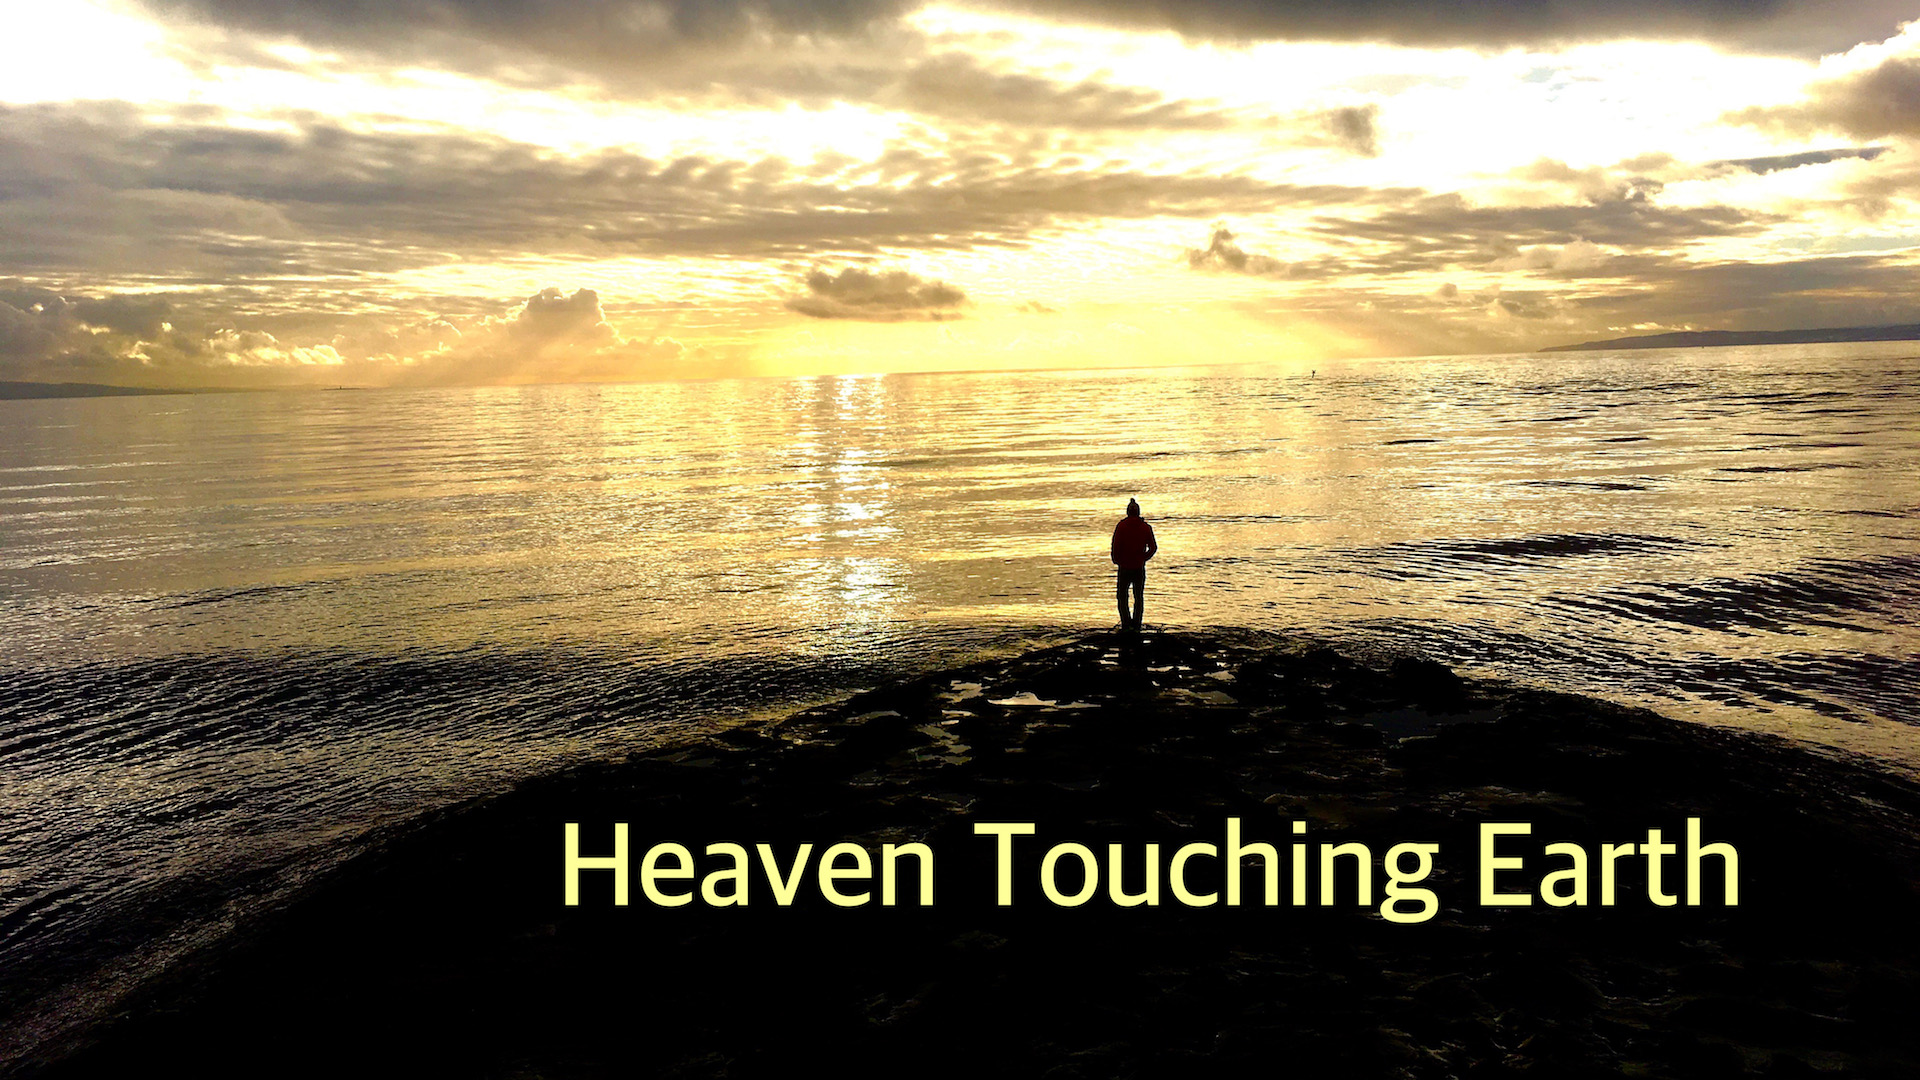 Heaven touches earth…